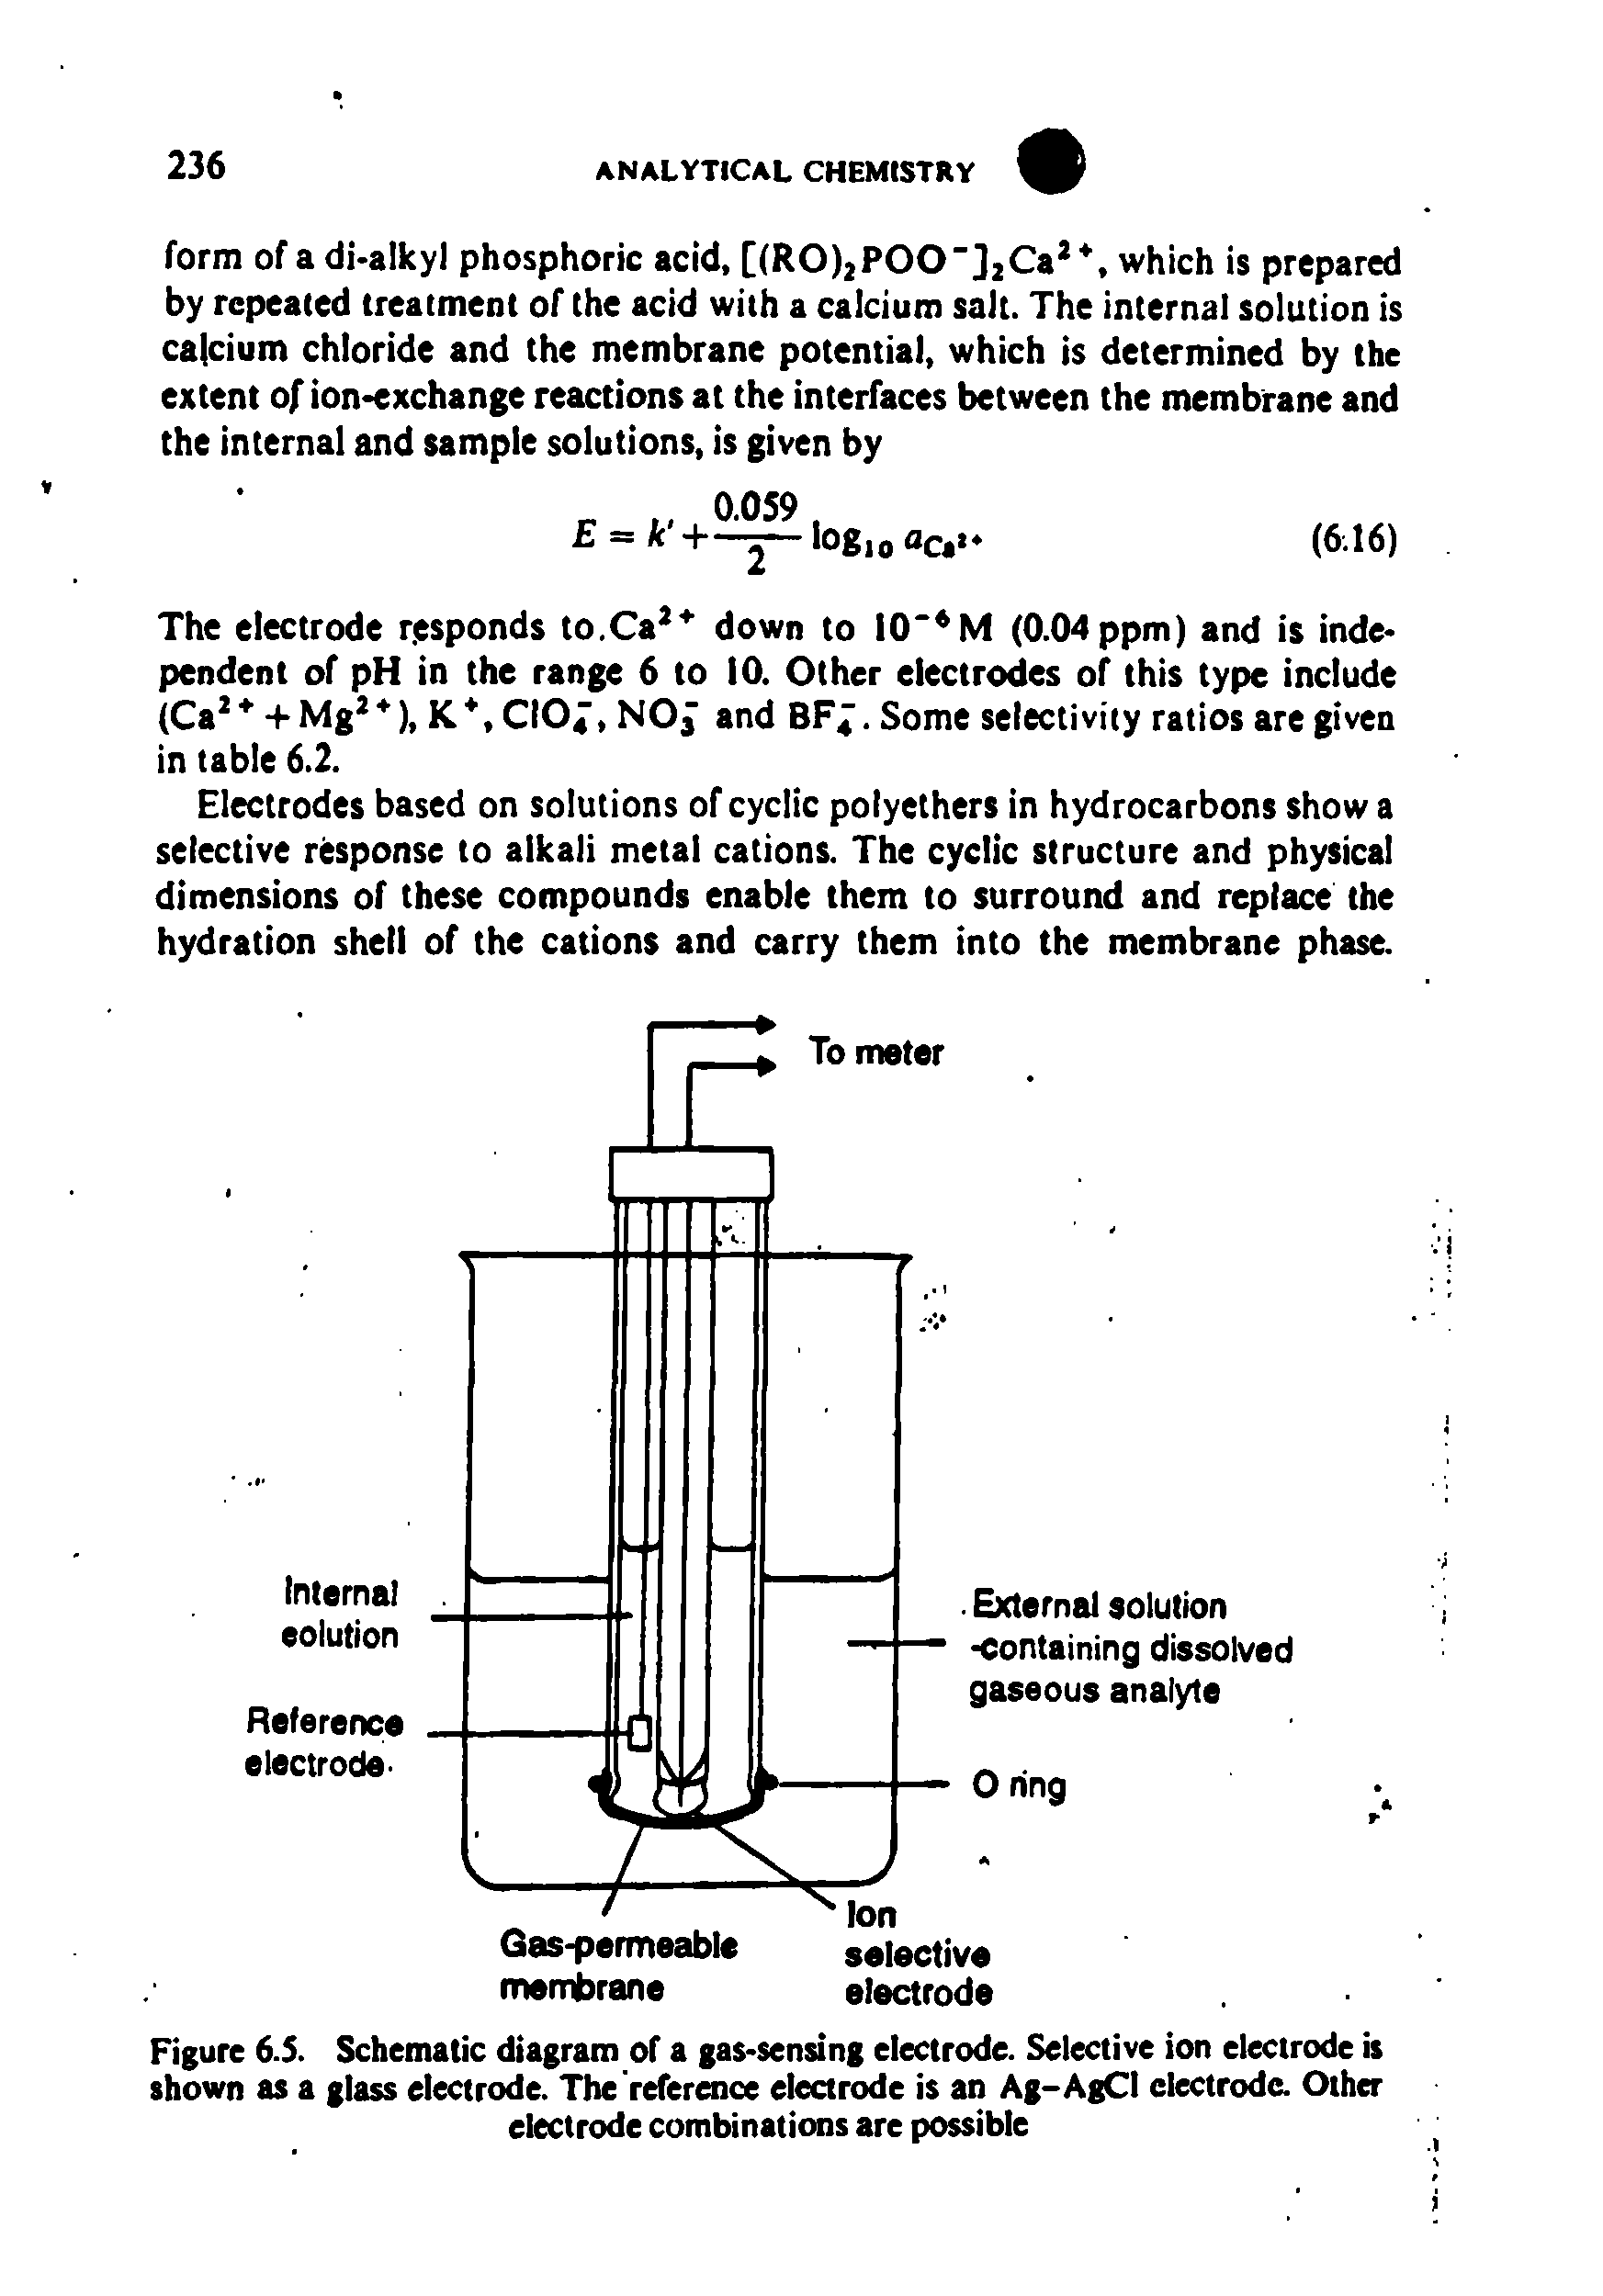 Figure 6.5. Schematic diagram of a gas-sensing electrode. Selective ion electrode is shown as a glass electrode. The reference electrode is an Ag-AgCI electrode. Other electrode combinations are possible...